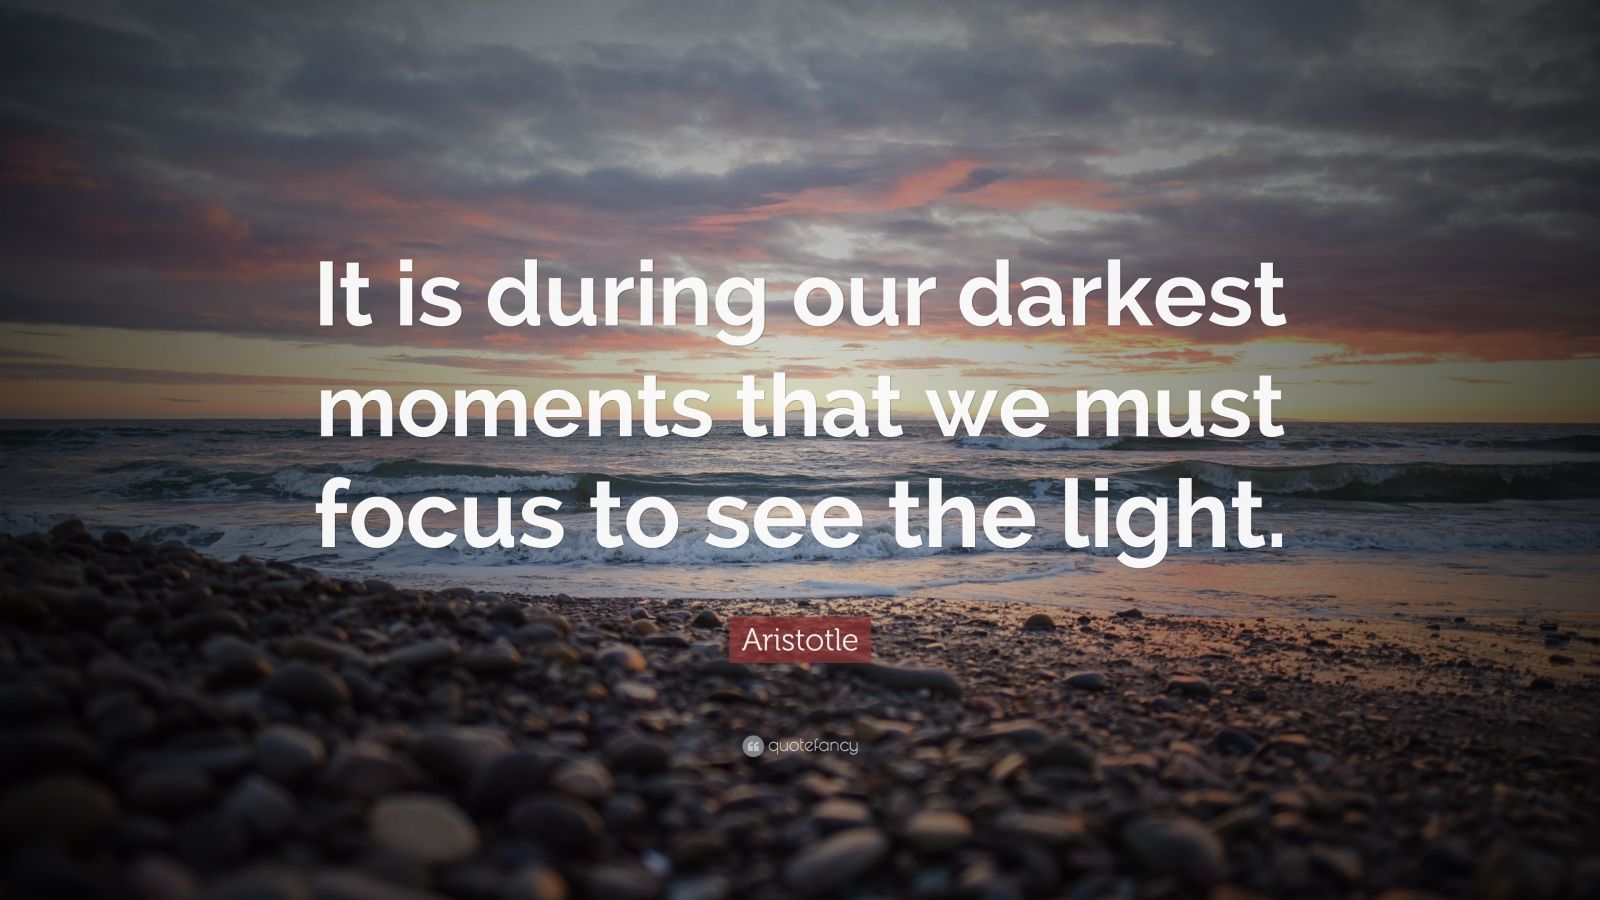 Aristotle Quote: “It is during our darkest moments that we must focus